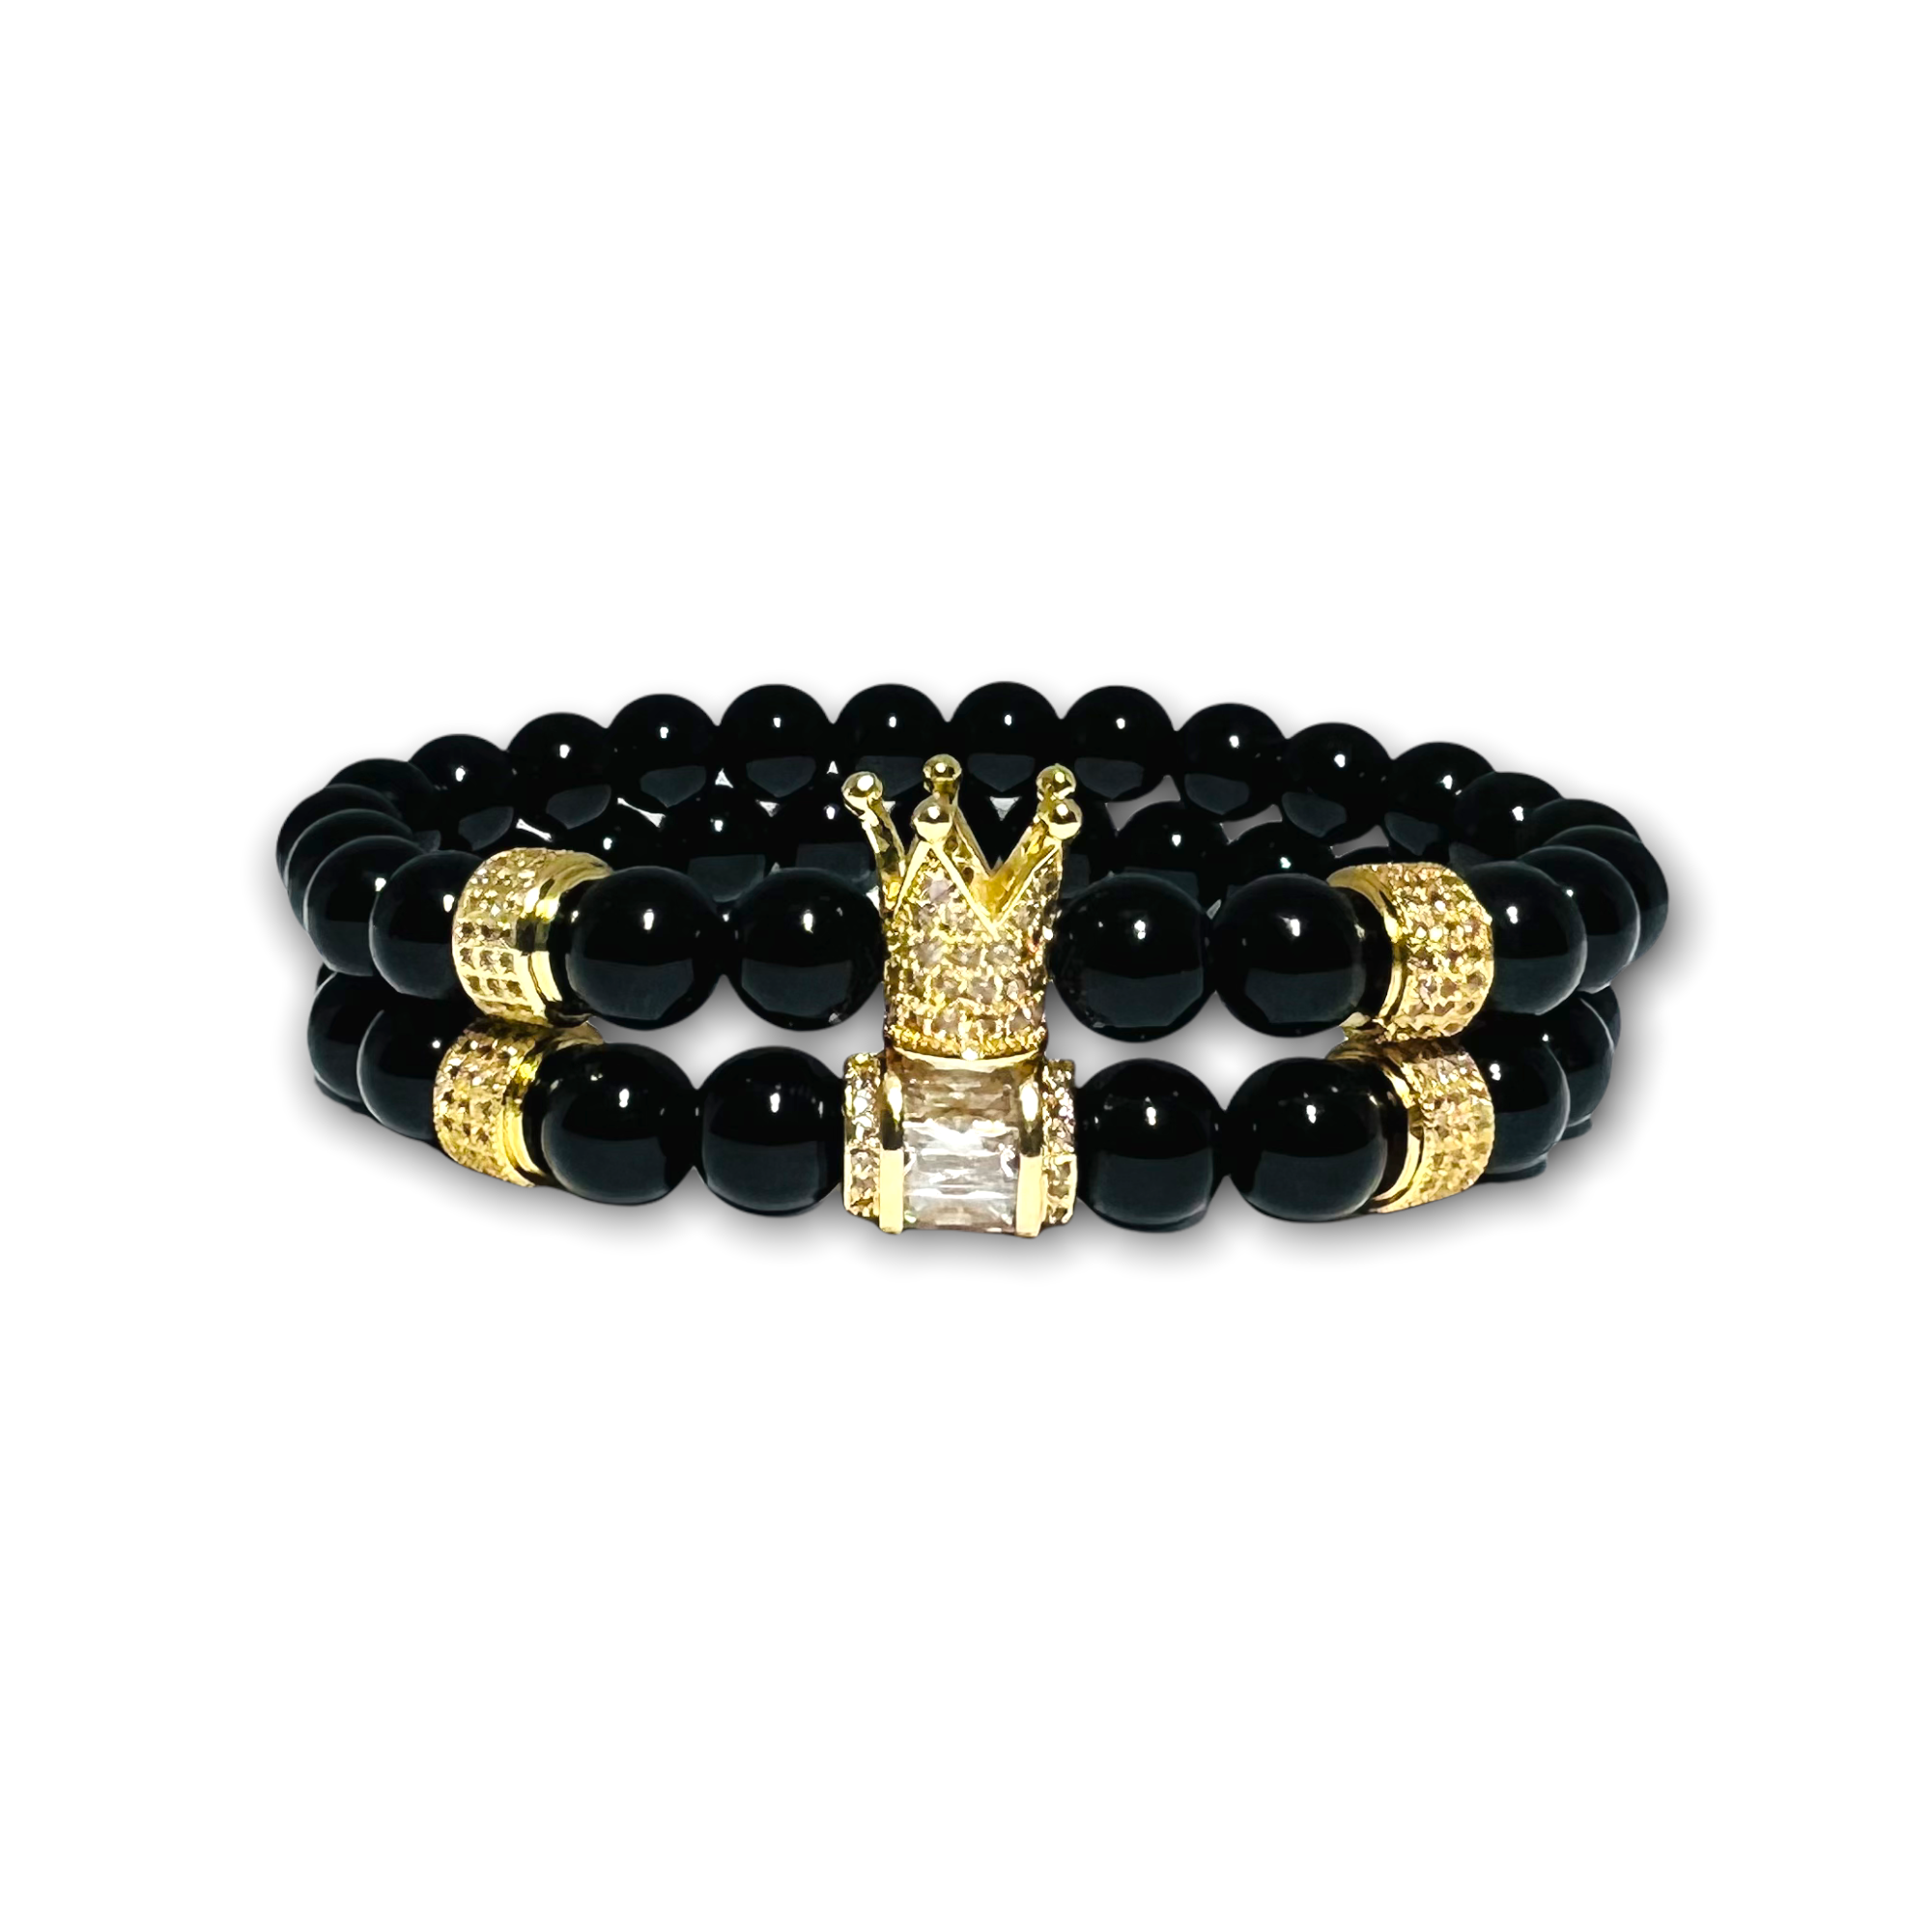 Black Polished Onyx Stone Set of Two Bracelets with Gold Design,Crown Clear Zirconia